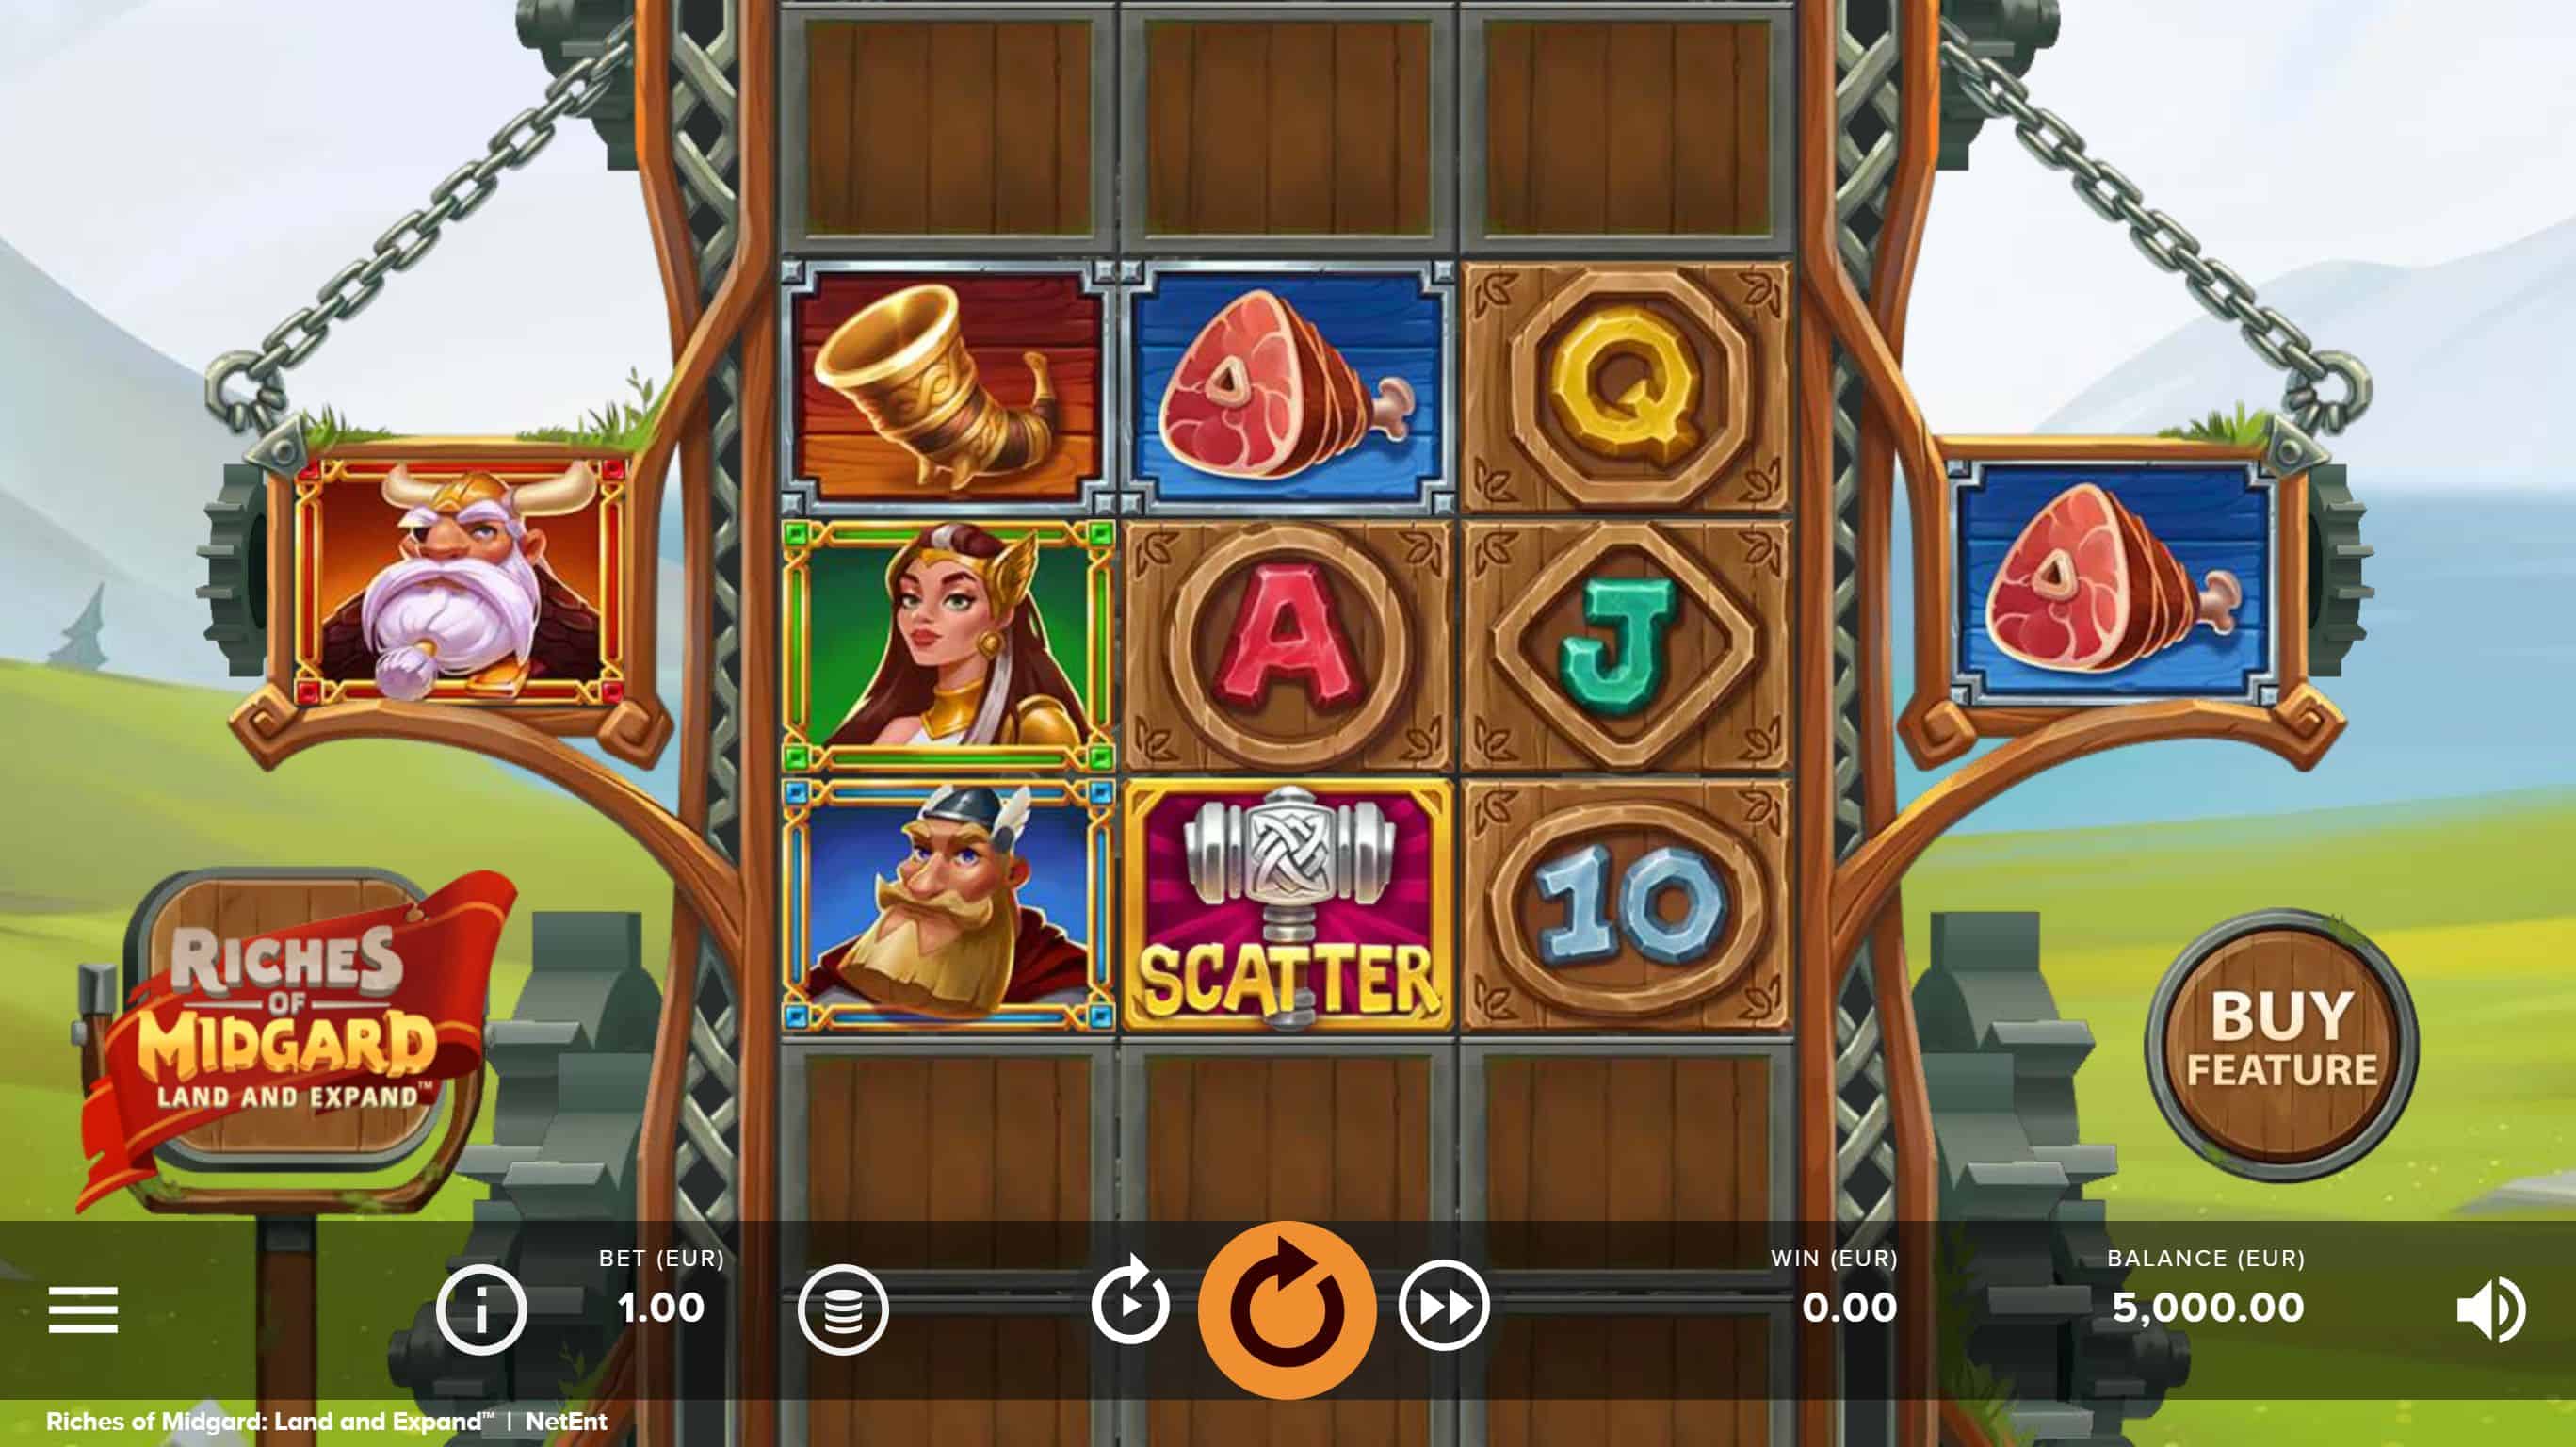 Riches of Midgard Land and Expand Slot Game Free Play at Casino Ireland 01